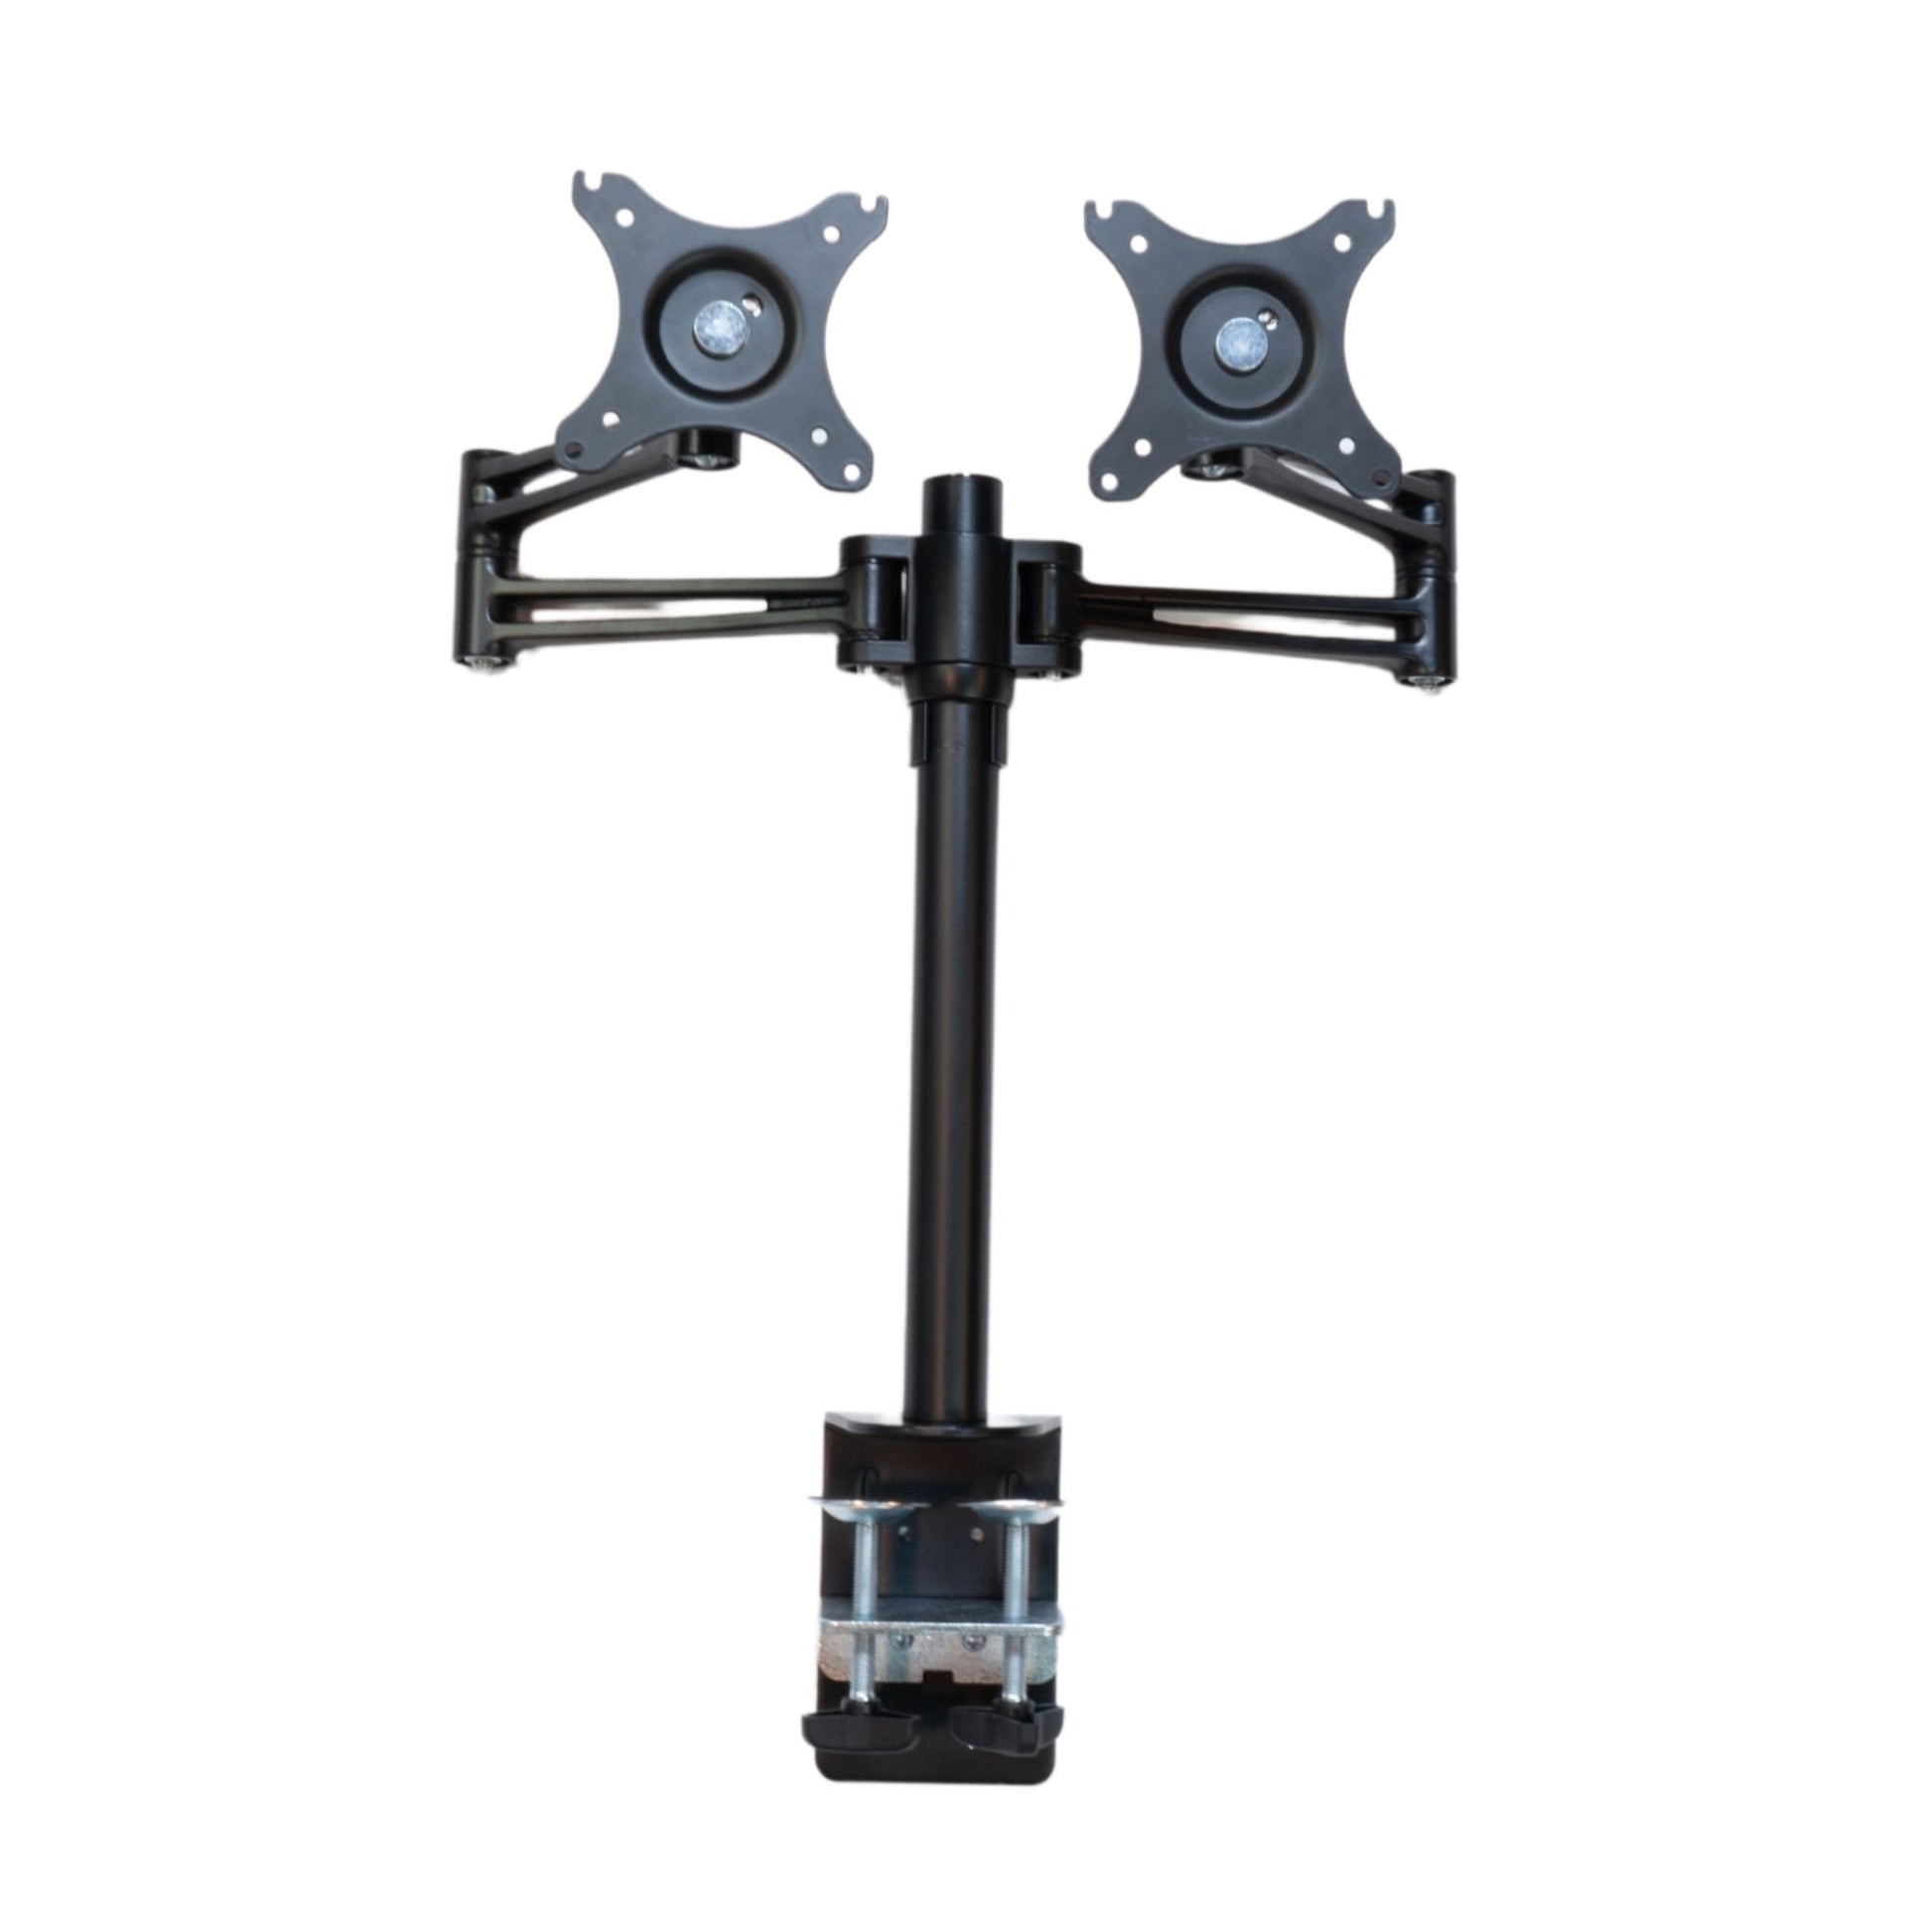 DM-01-2 Dual Monitor Stand - Vertical Double 17 - 30 Monitor